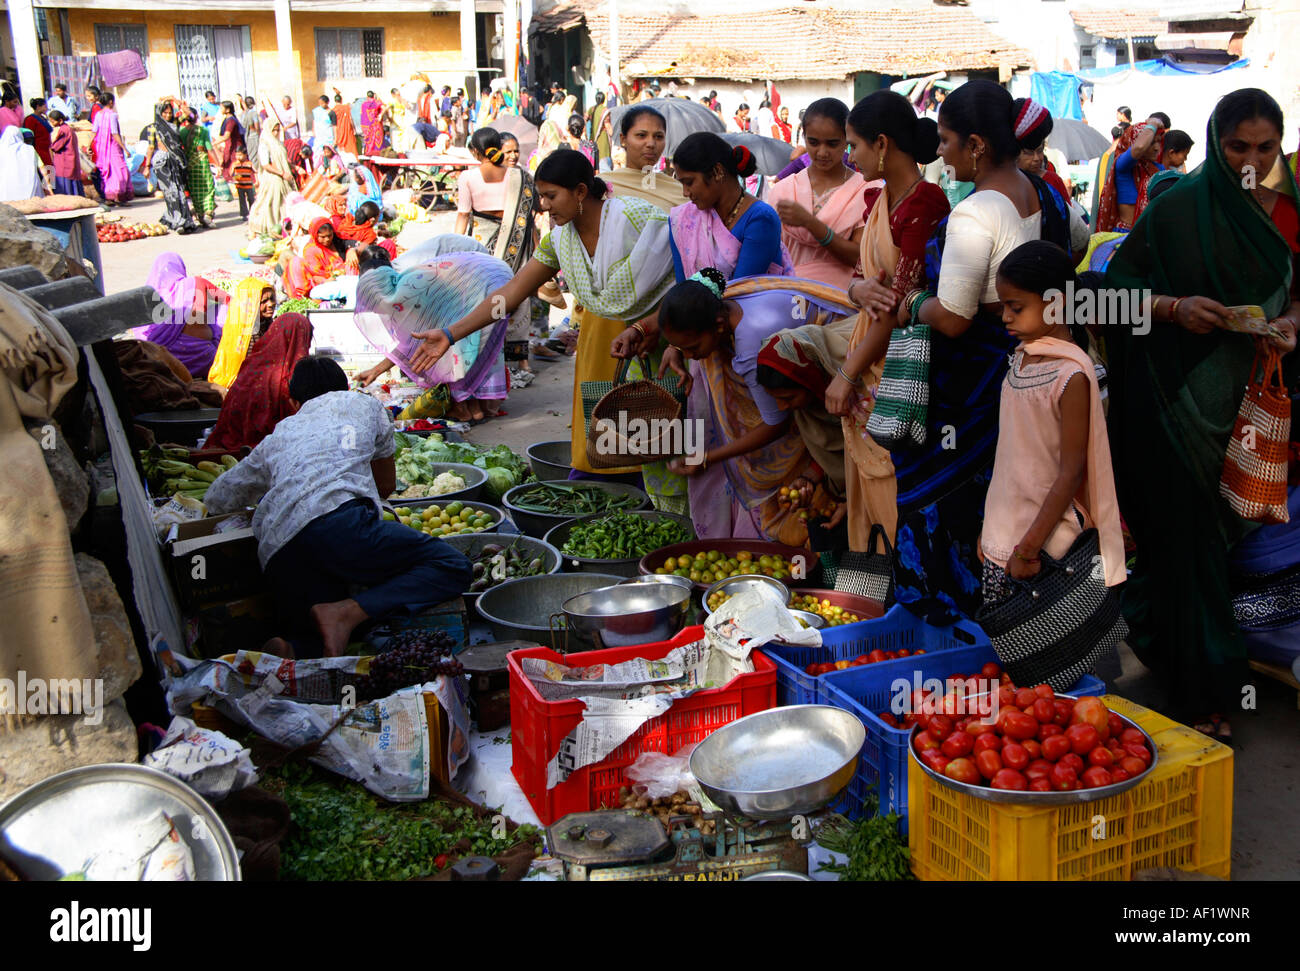 Indian females crowded around busy fruit and vegetable stall in market at Vanakbara Fishing Village, Diu Island, Gujarat, India Stock Photo